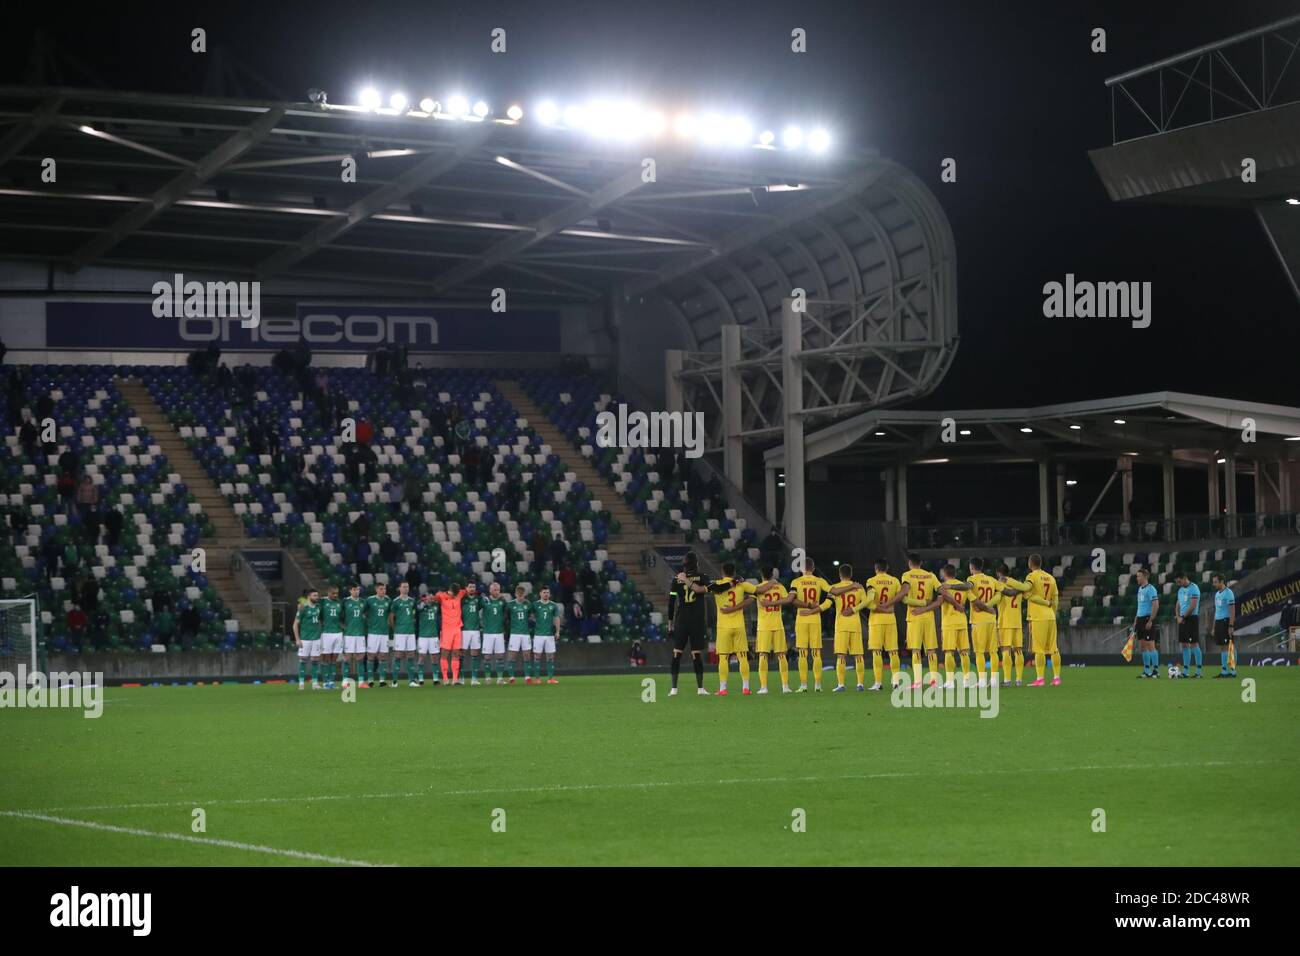 Northern Ireland and Romania pause for a minutes silence to remember the victims of a fire in a hospital in Piatra Neamt, Romania on Saturday 14th November prior to the UEFA Nations League match at Windsor Park, Belfast. Stock Photo